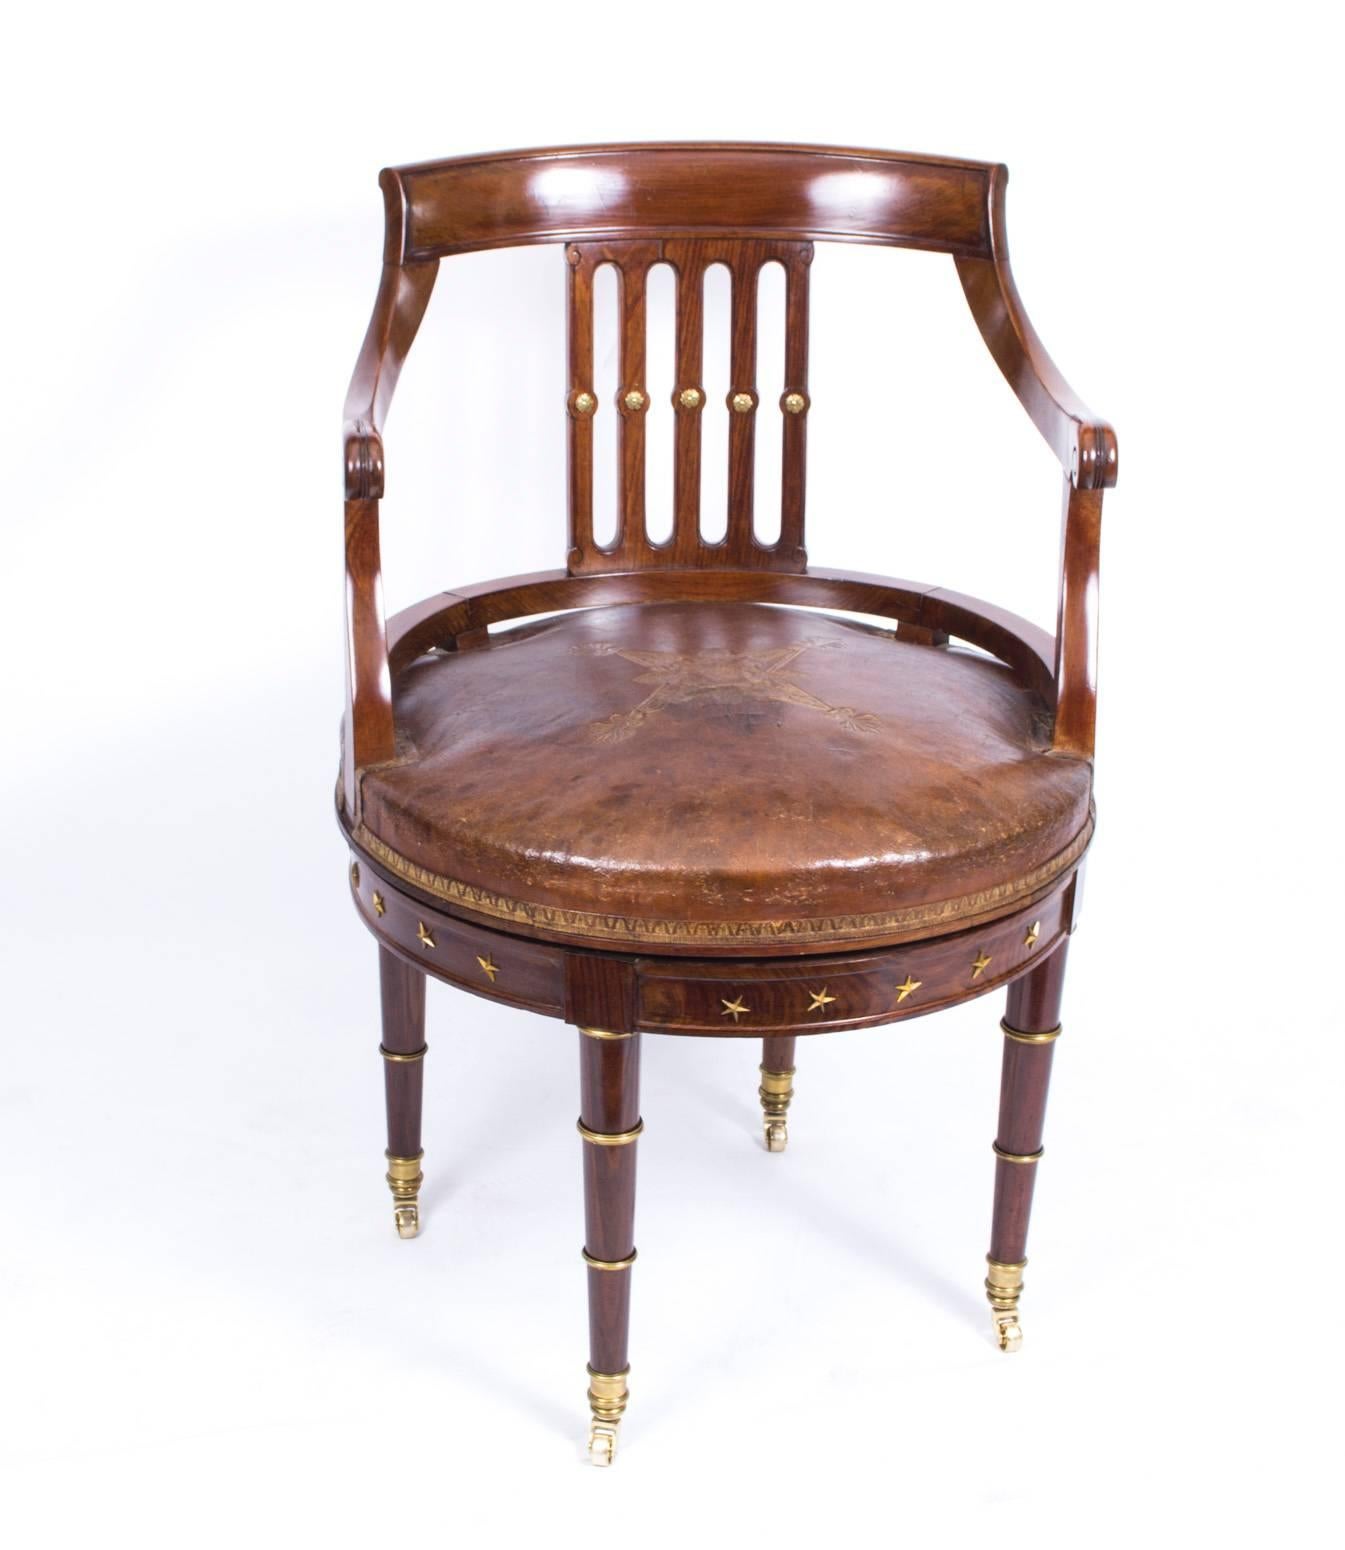 This is a beautiful antique and very comfortable French Empire mahogany revolving desk chair, circa 1870 in date.

The mahogany is beautiful in colour and has been embellished with striking and decorative ormolu mounts. The original gold embossed